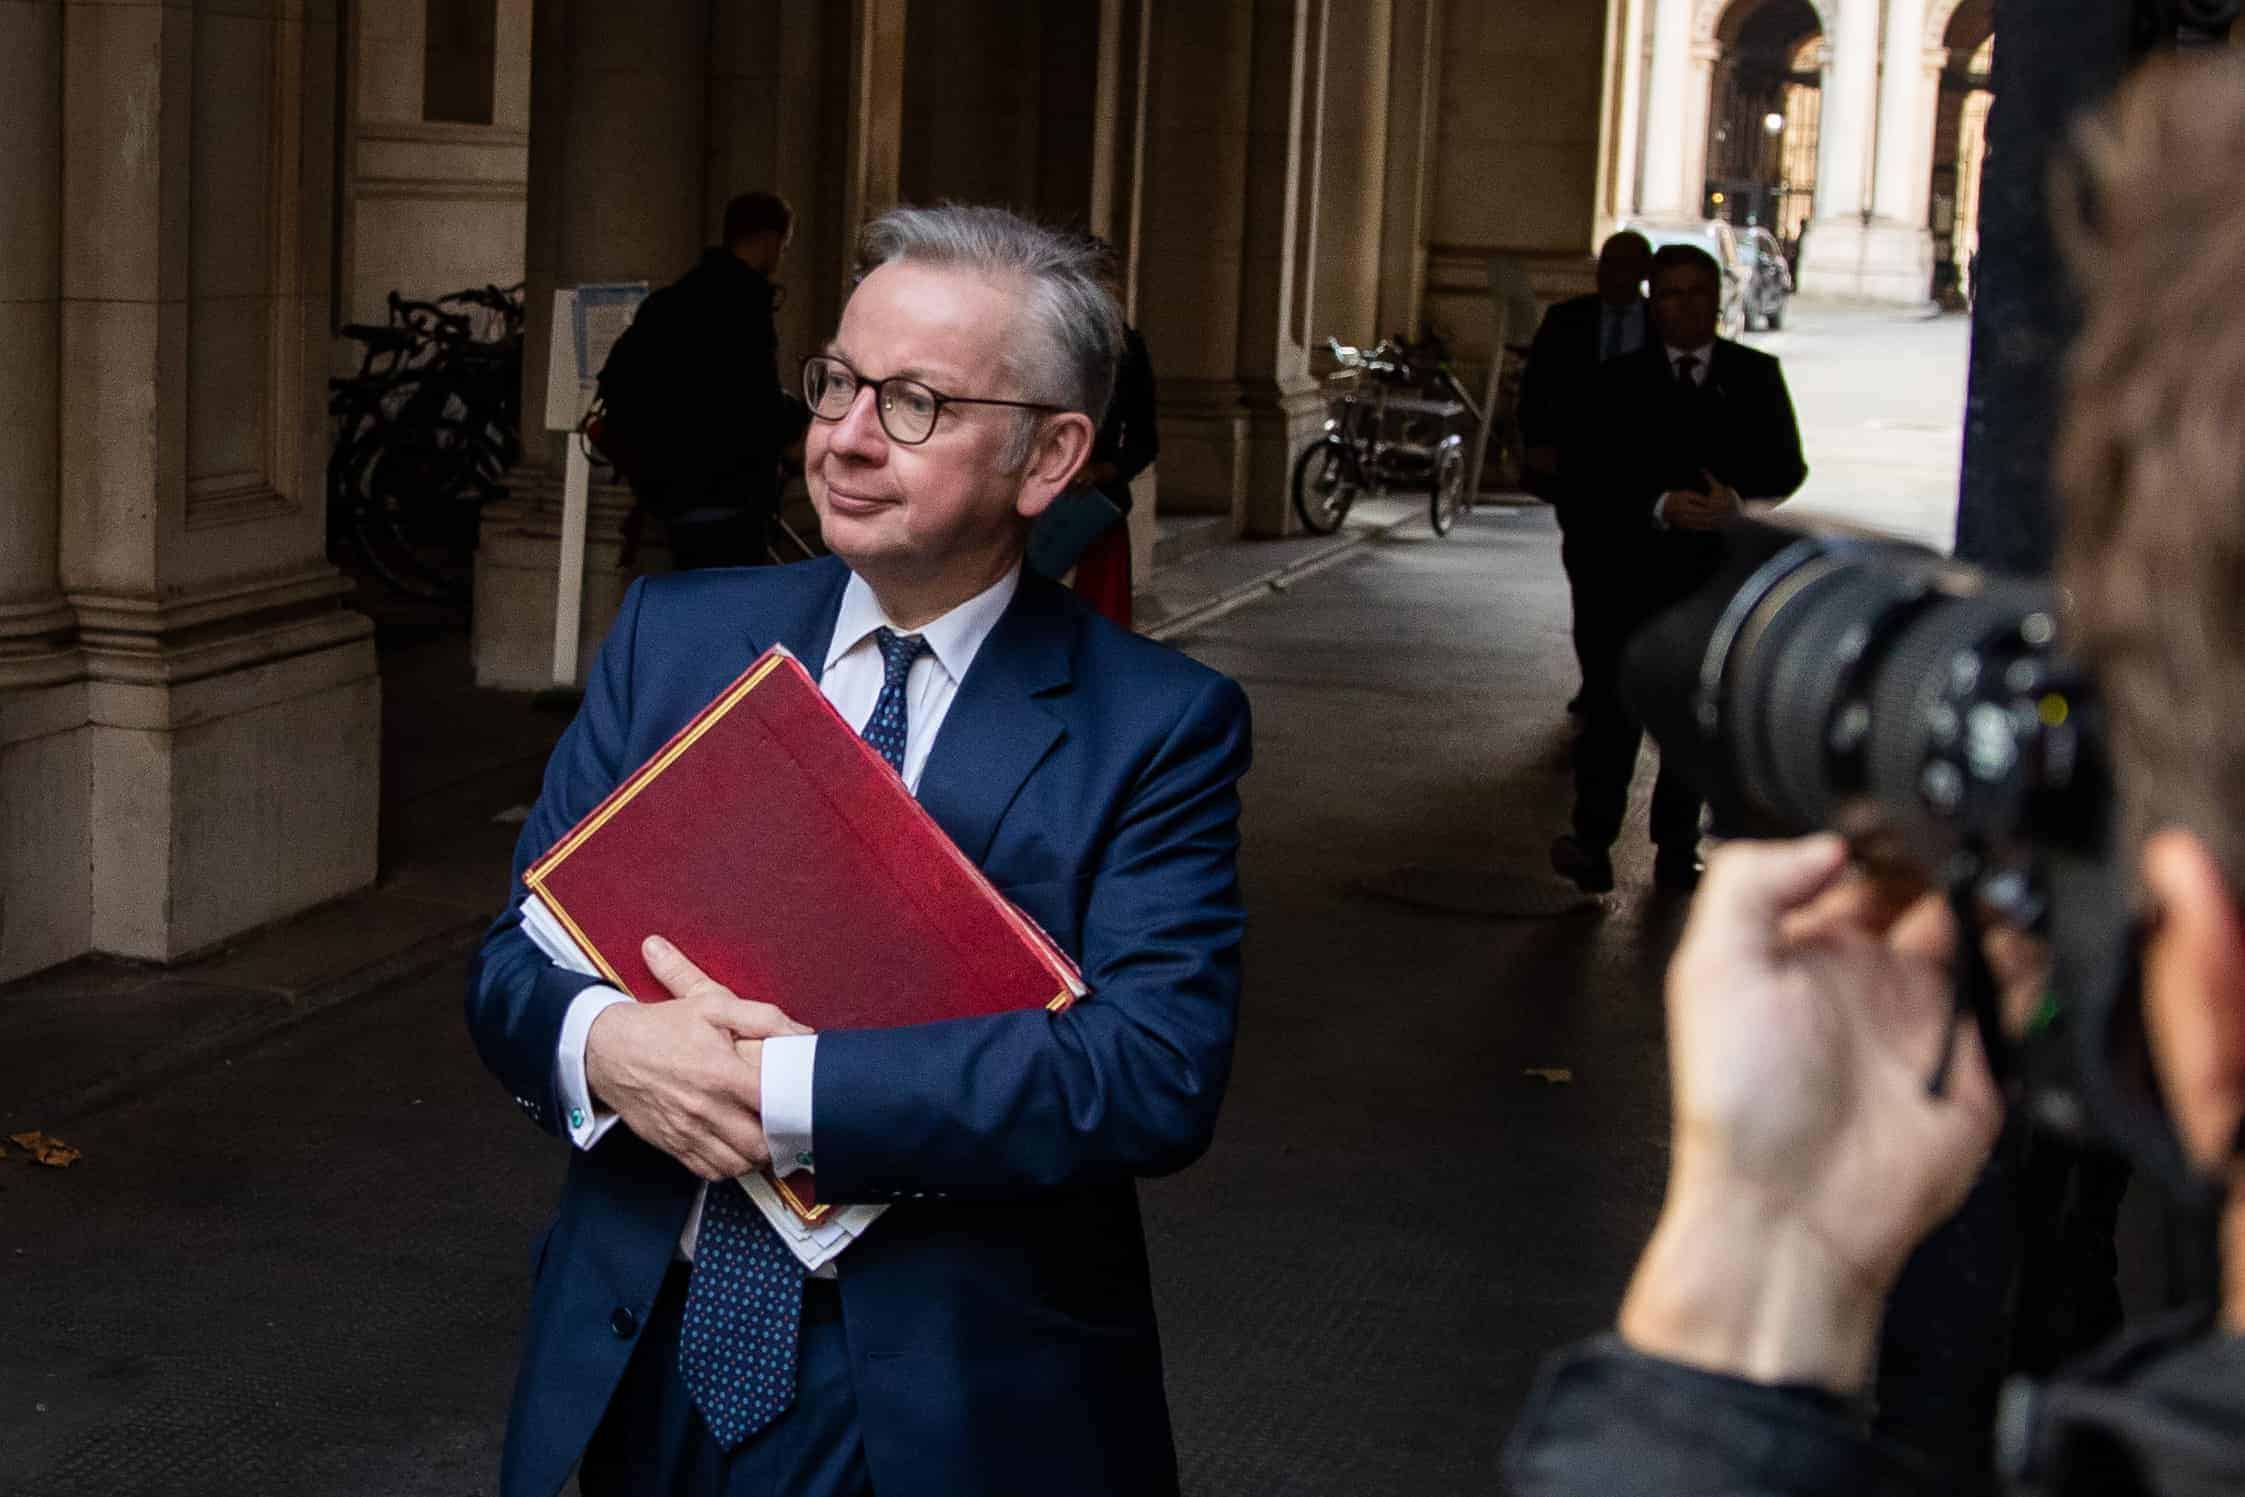 Gove ‘must confirm’ whether ministers were told they would lose funding if they failed to toe party line